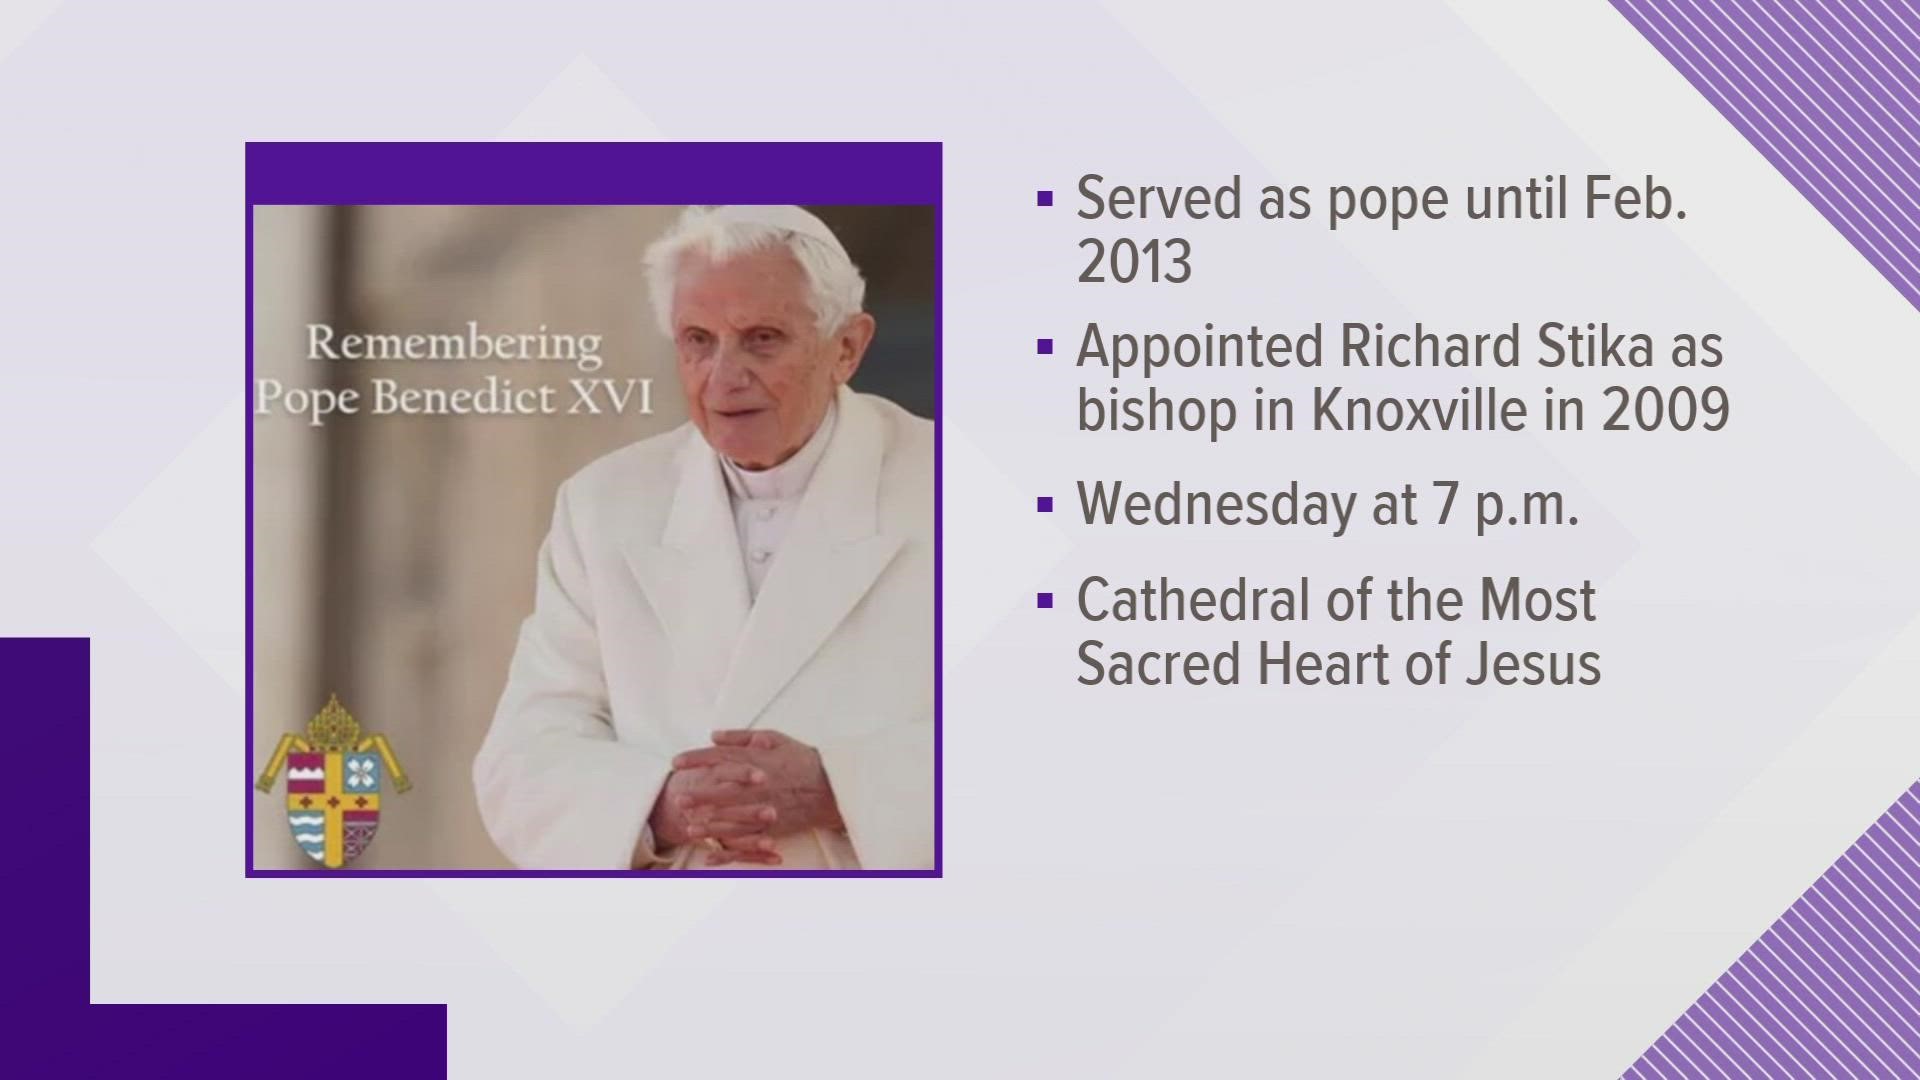 People in Knoxville will have the chance to honor Benedict XVI. Bishop Richard Stika will lead the mass.